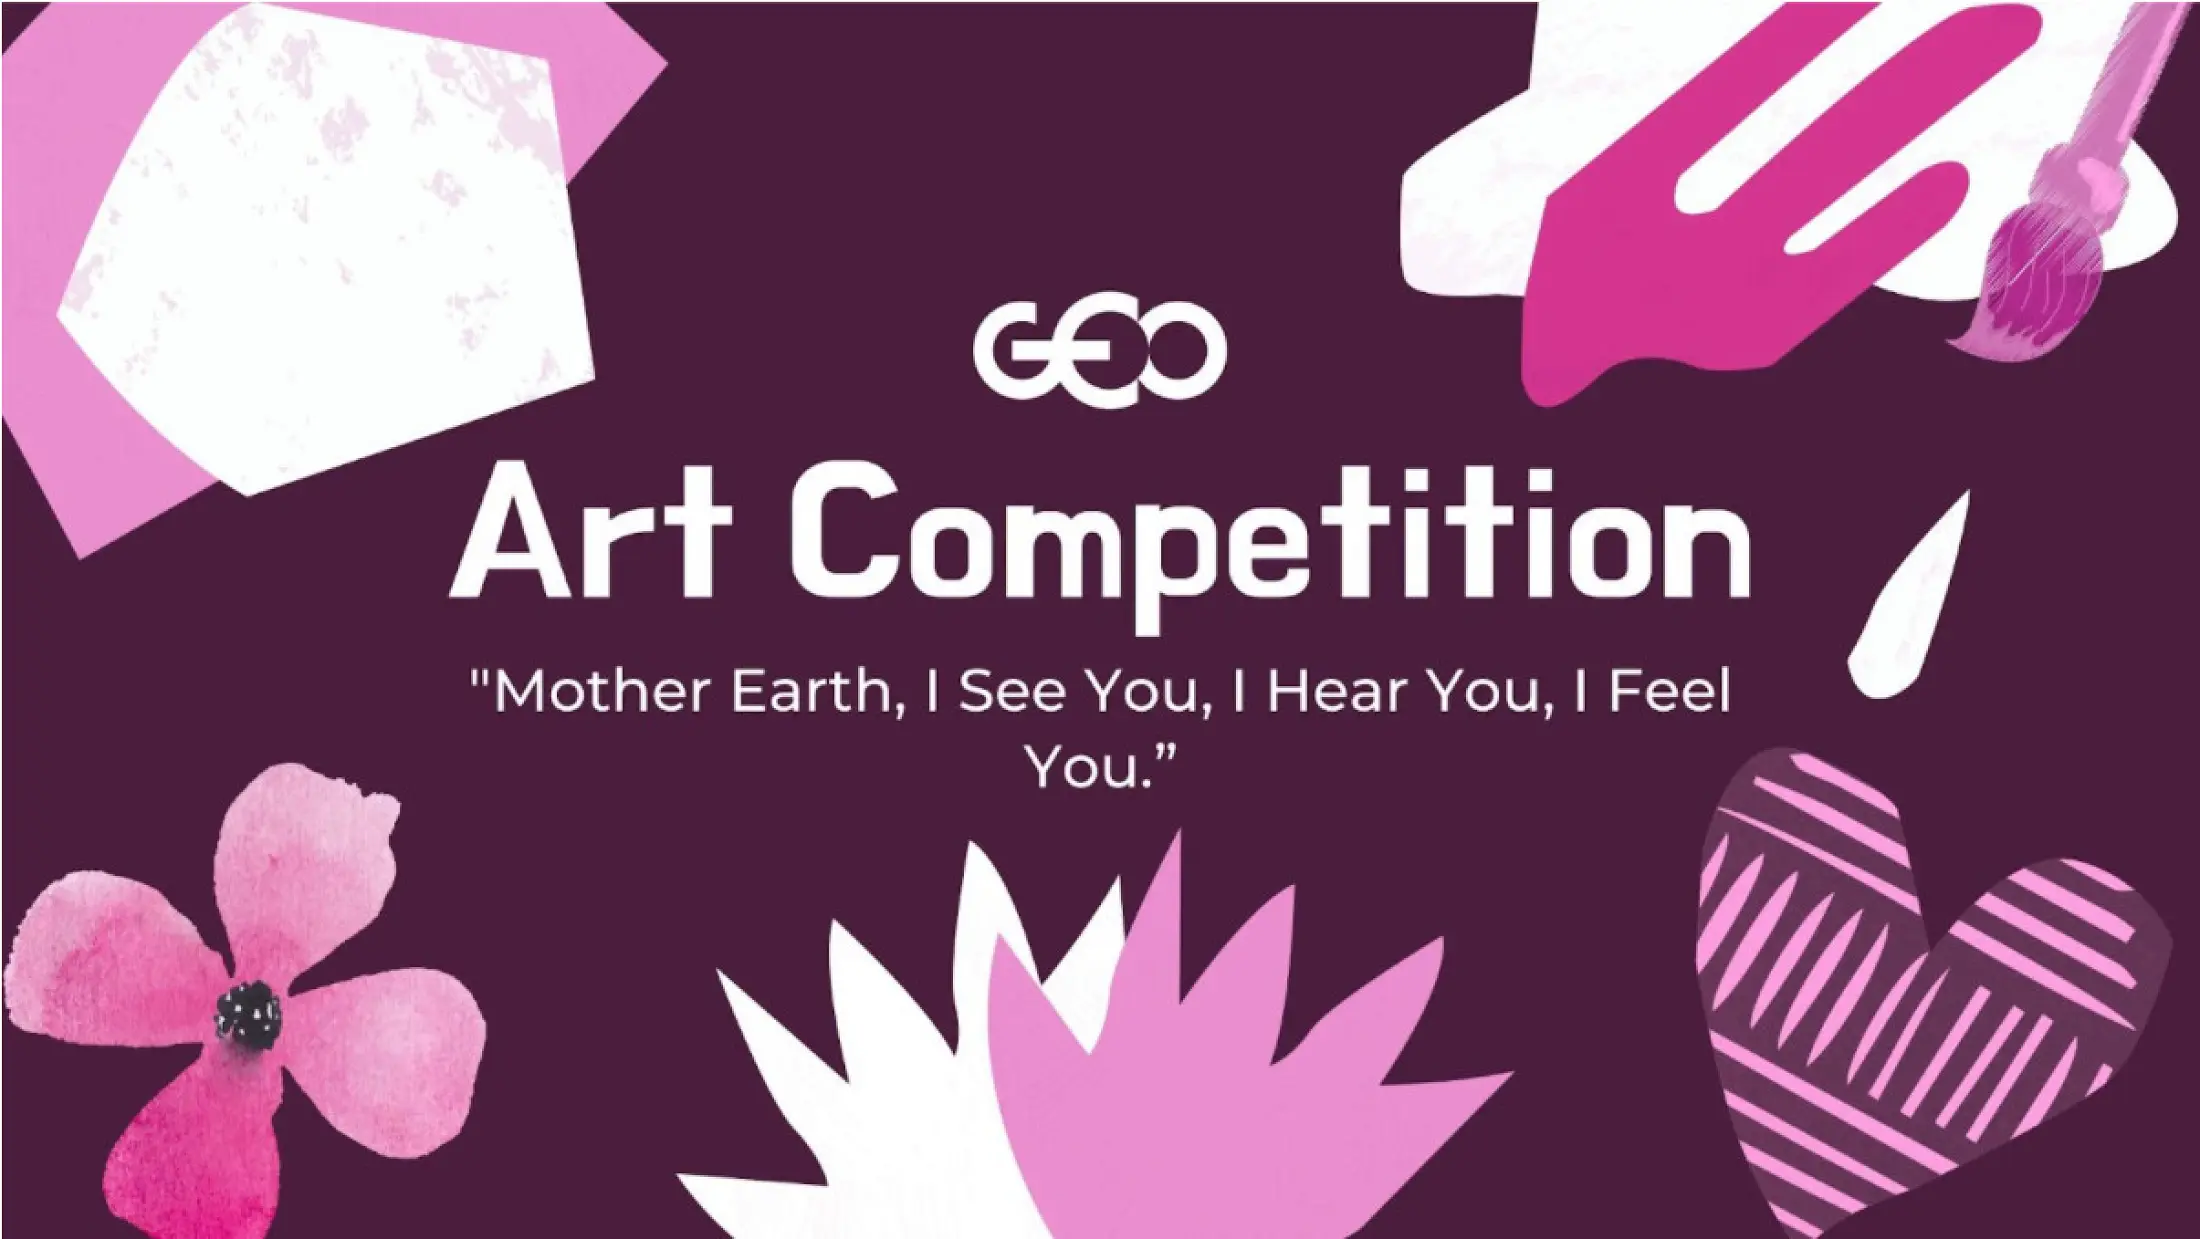 Announcing winners of the GEO Art Competition